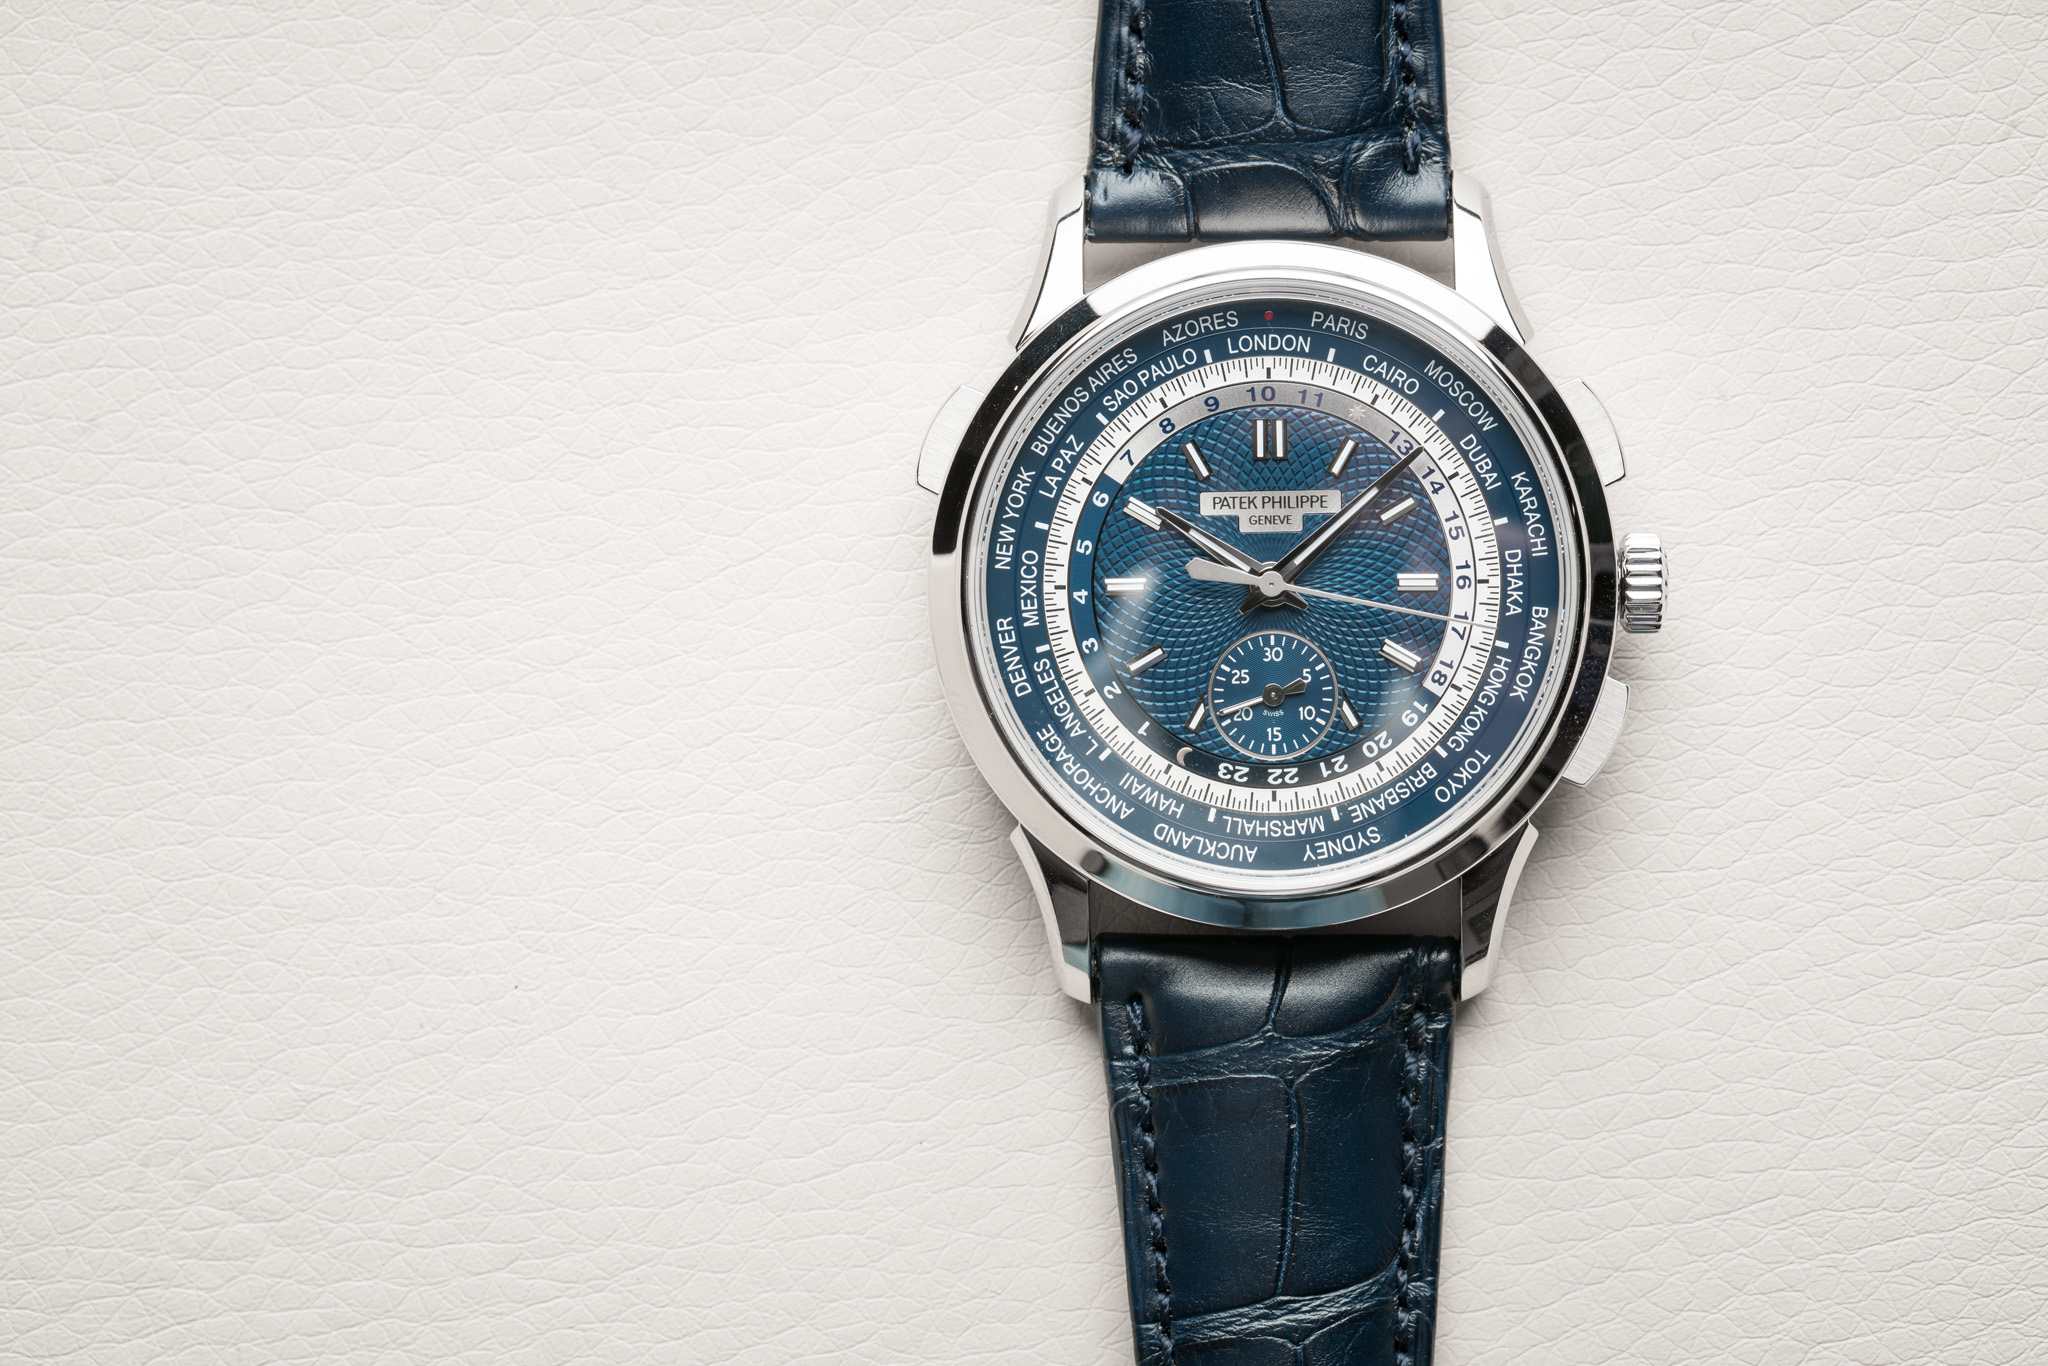 Baselworld 2016: Highlights From The Patek Philippe Collection